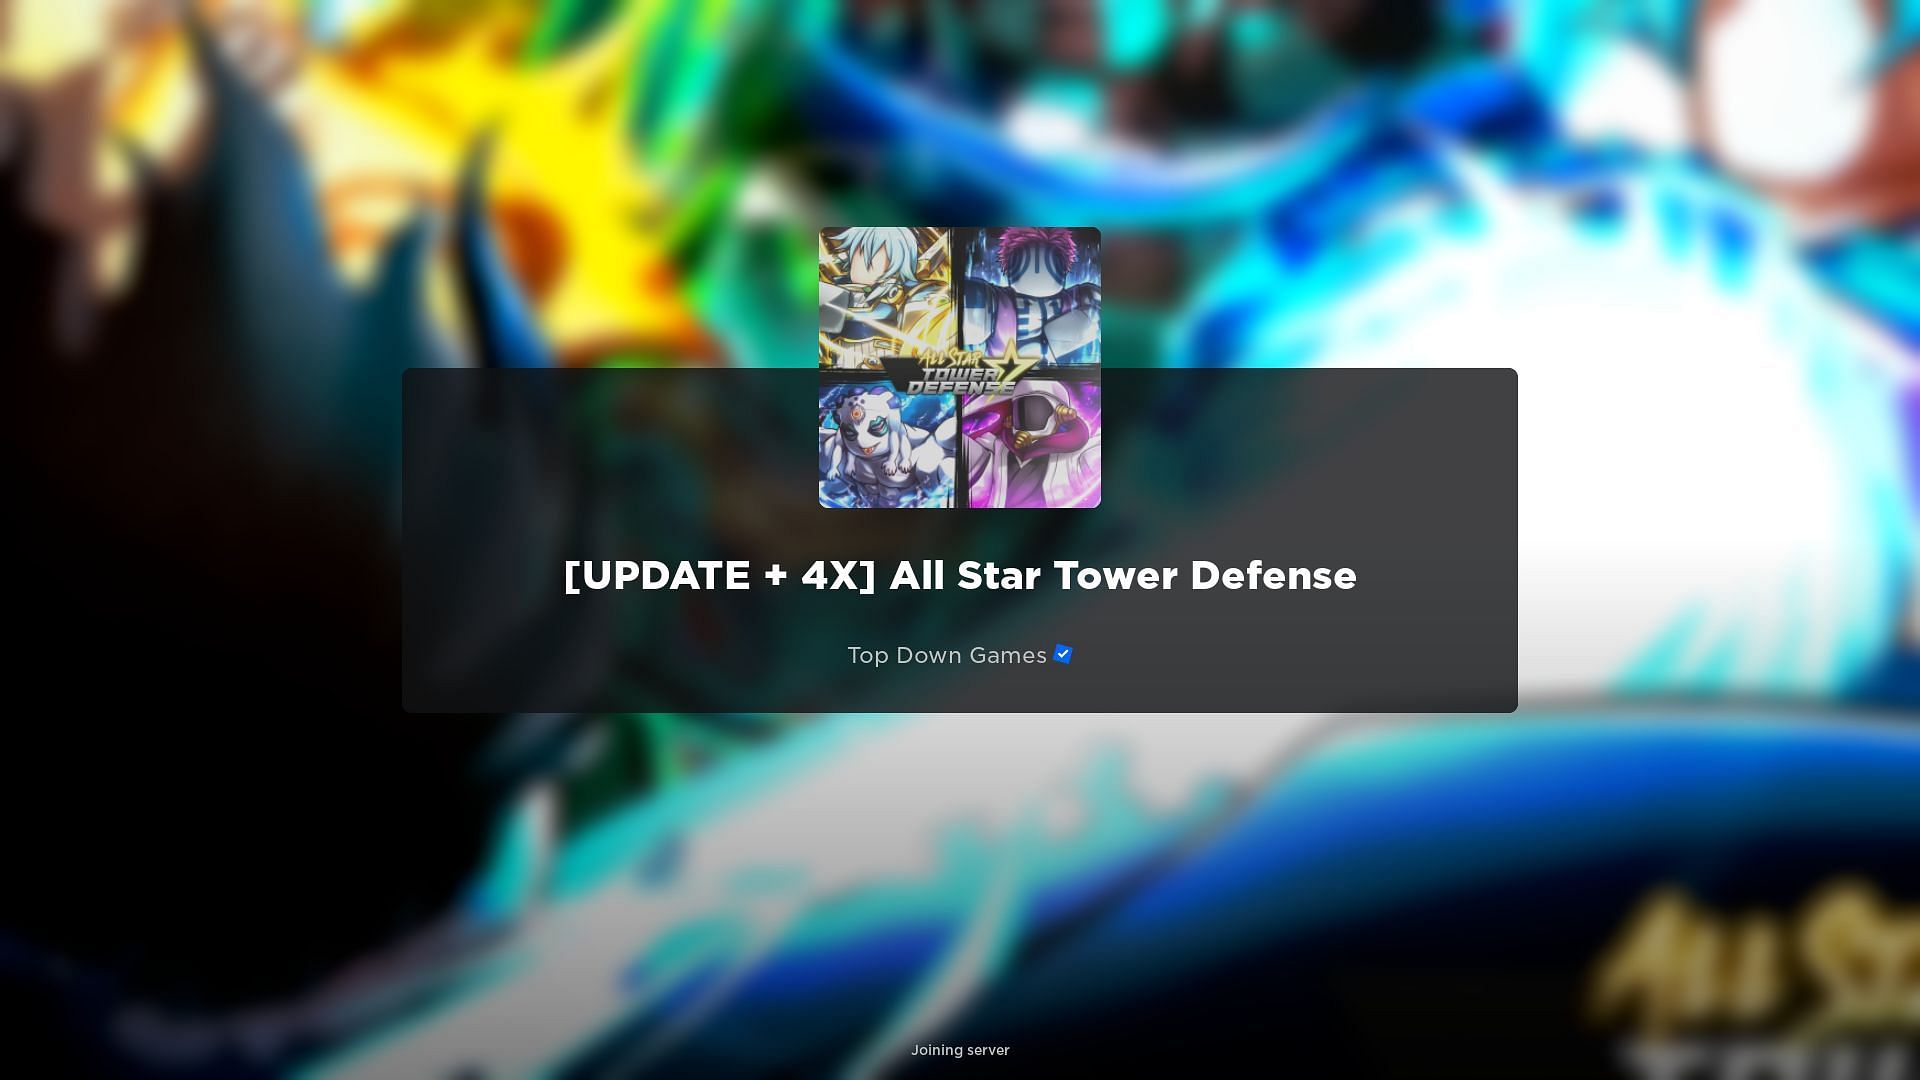 Completing the All Star Tower Defense Hunt